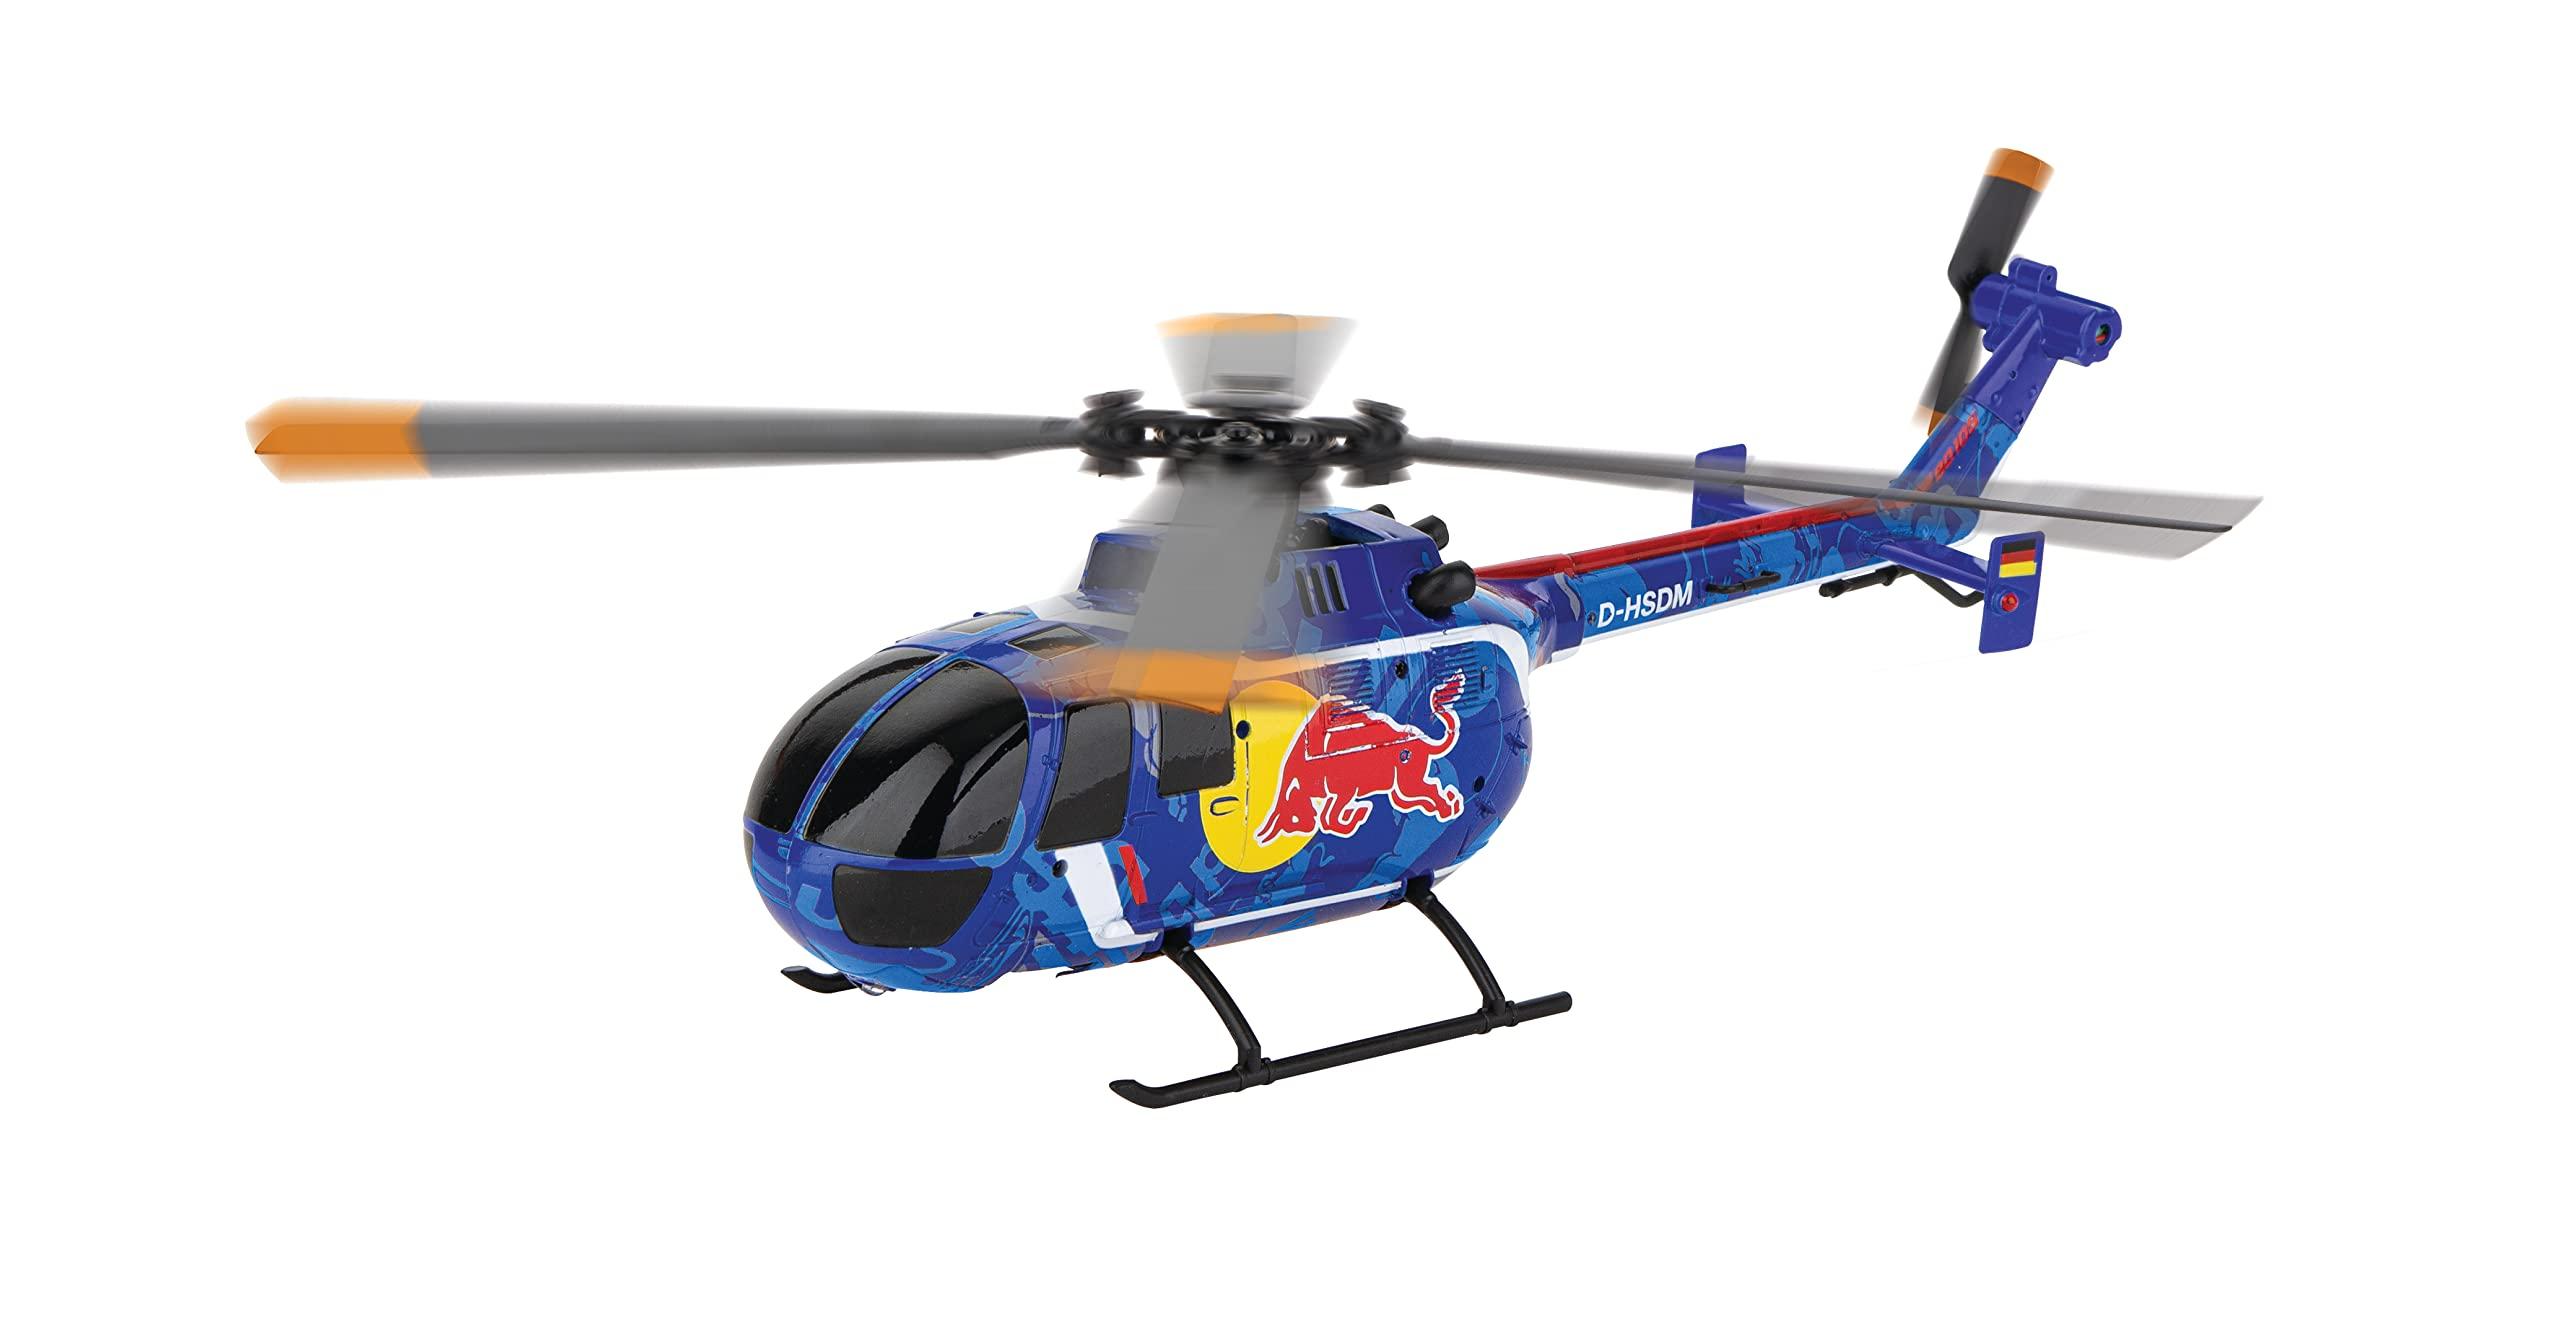 Bo 105 Helicopter Rc: Buying your perfect bo 105 helicopter rc?Factors to Consider When Buying a Bo 105 Helicopter RC